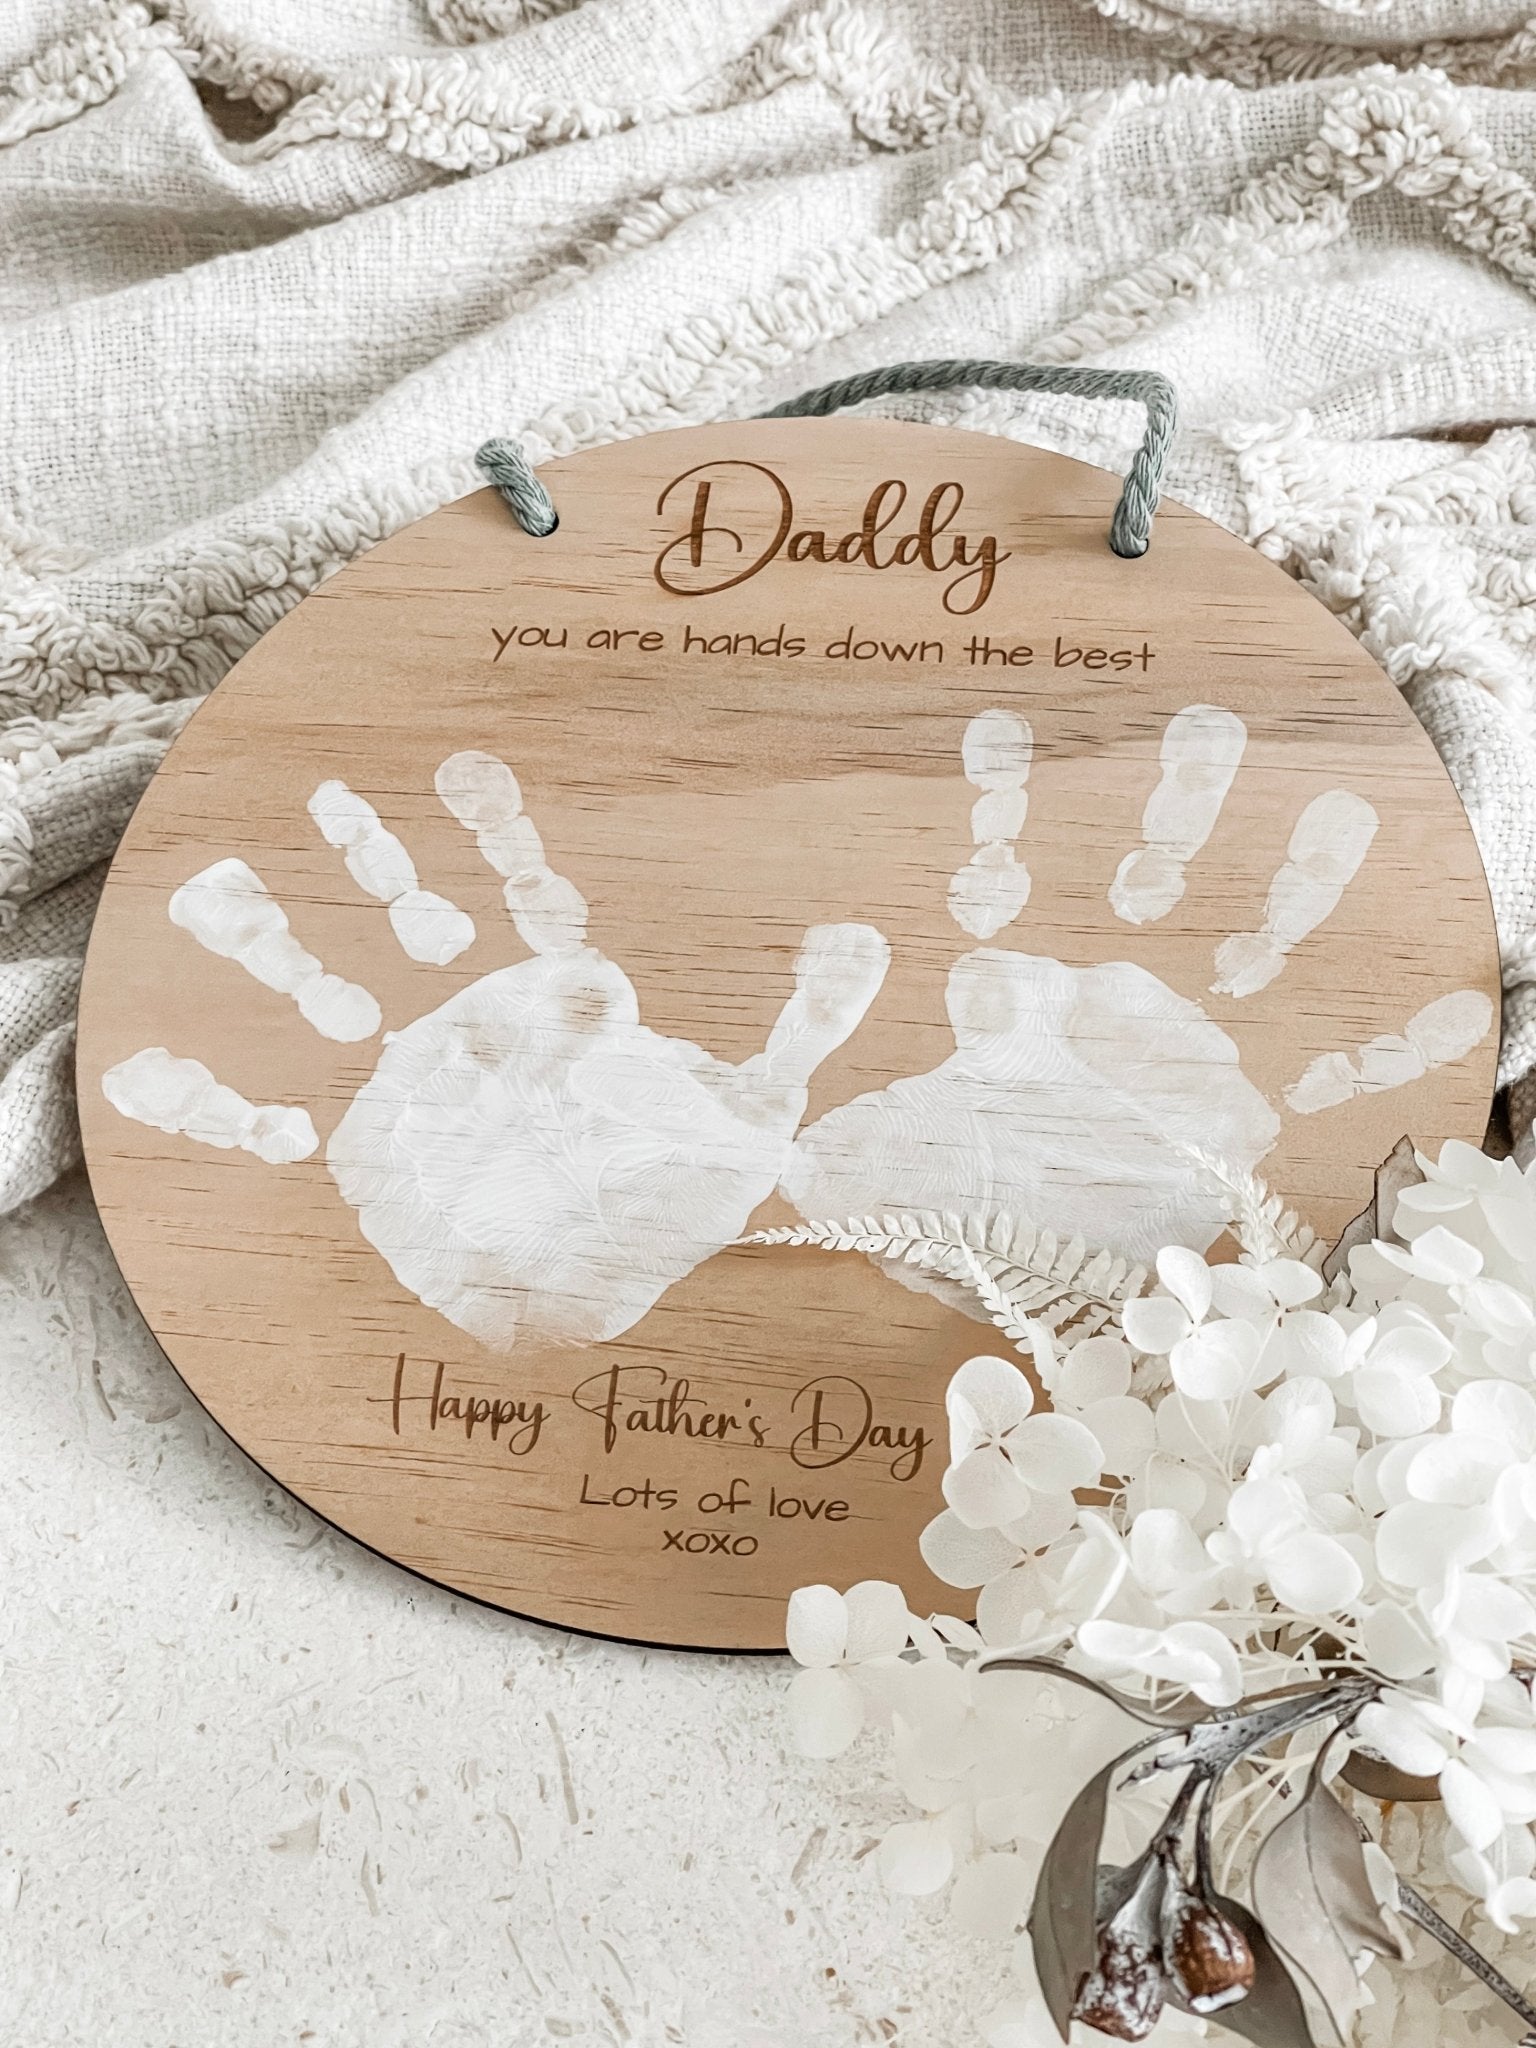 Personalised Handprint Plaque for Dad - The Humble Gift Co.